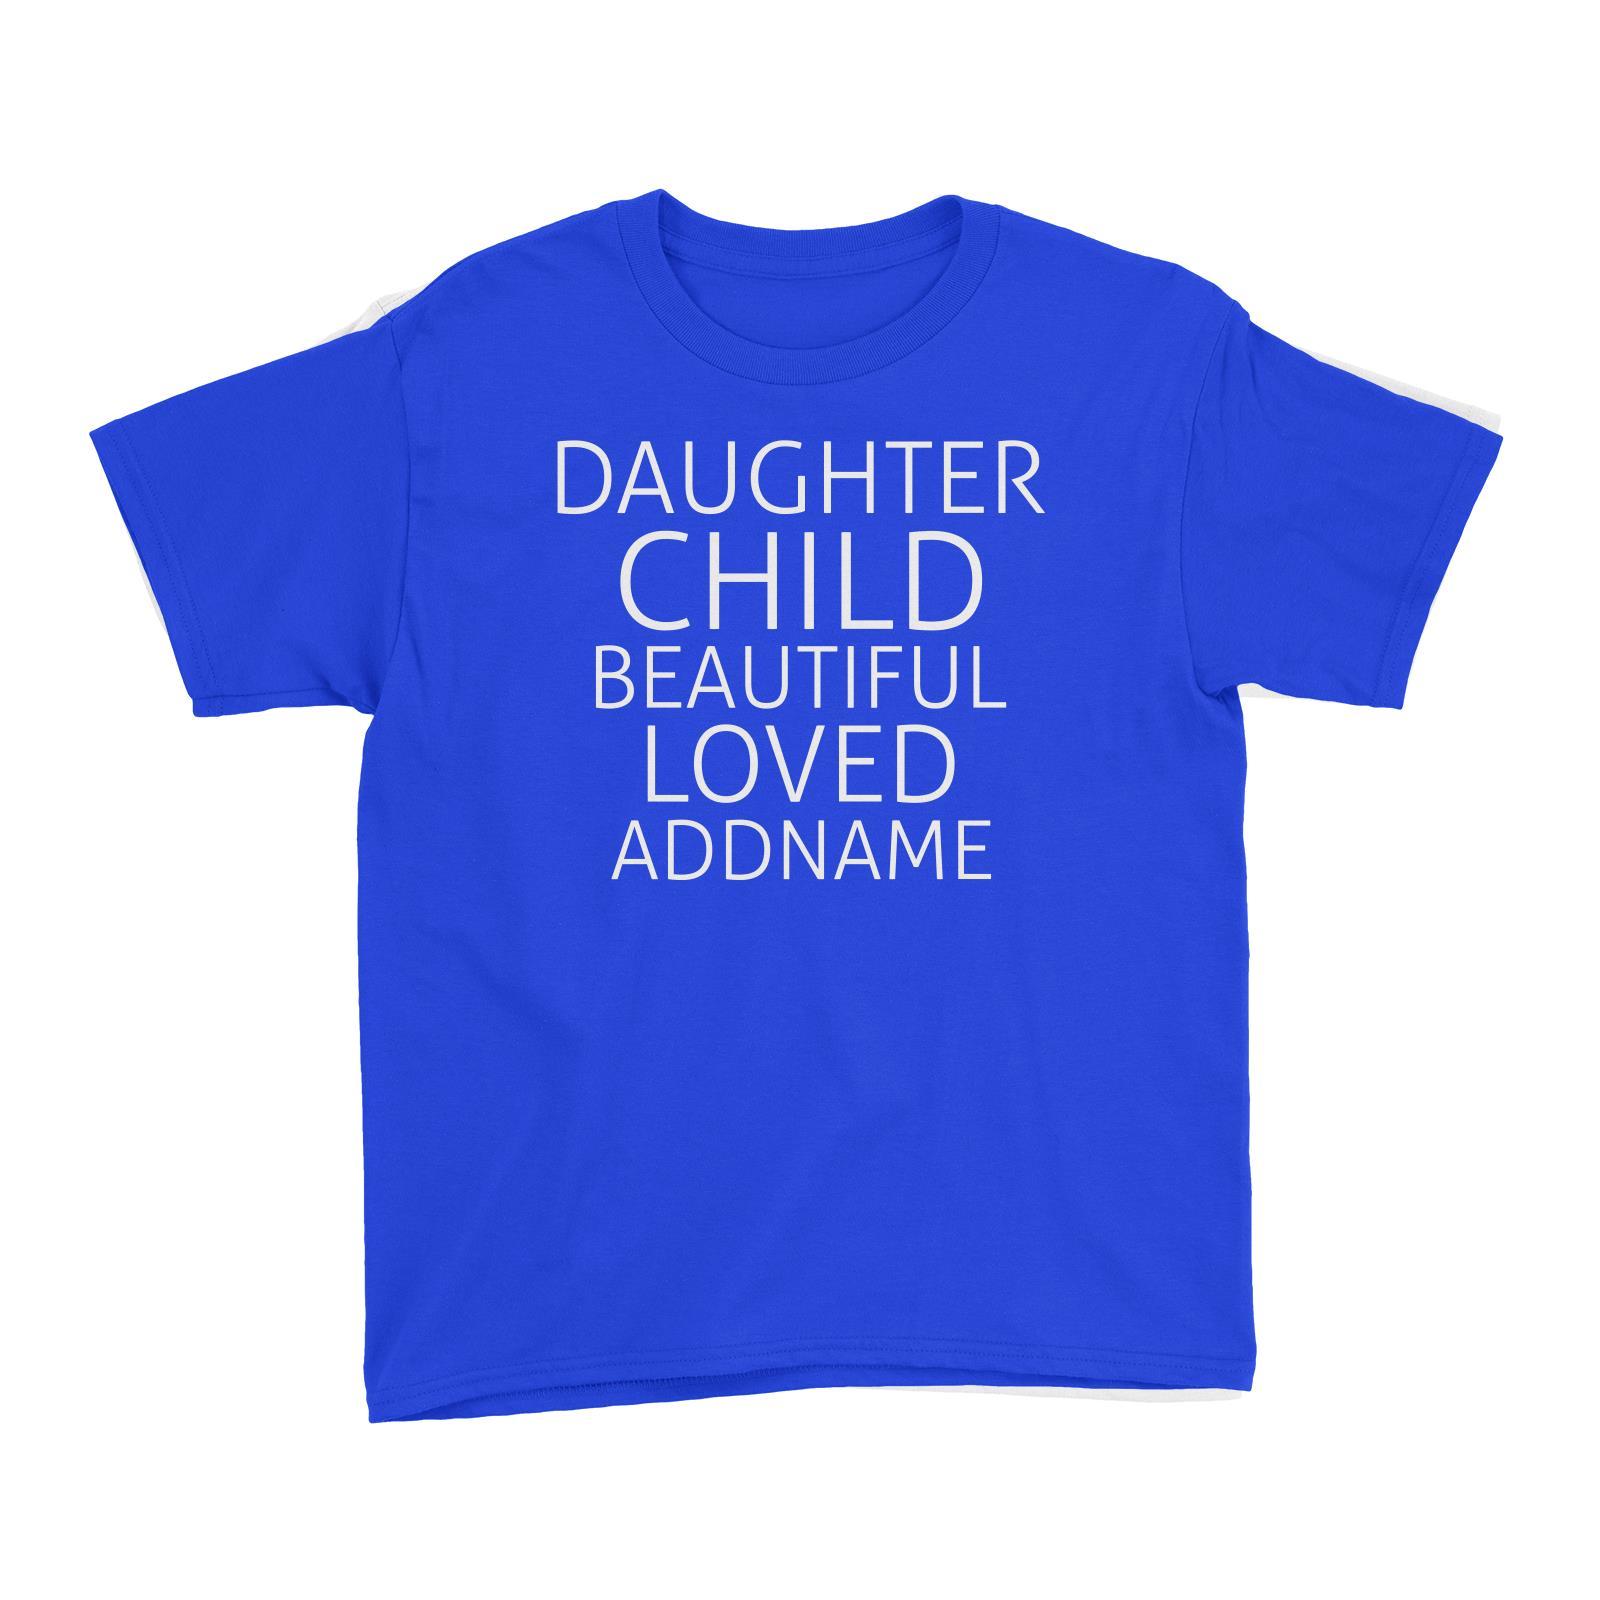 Daughter and Child Kid's T-Shirt Personalizable Designs Matching Family Simple